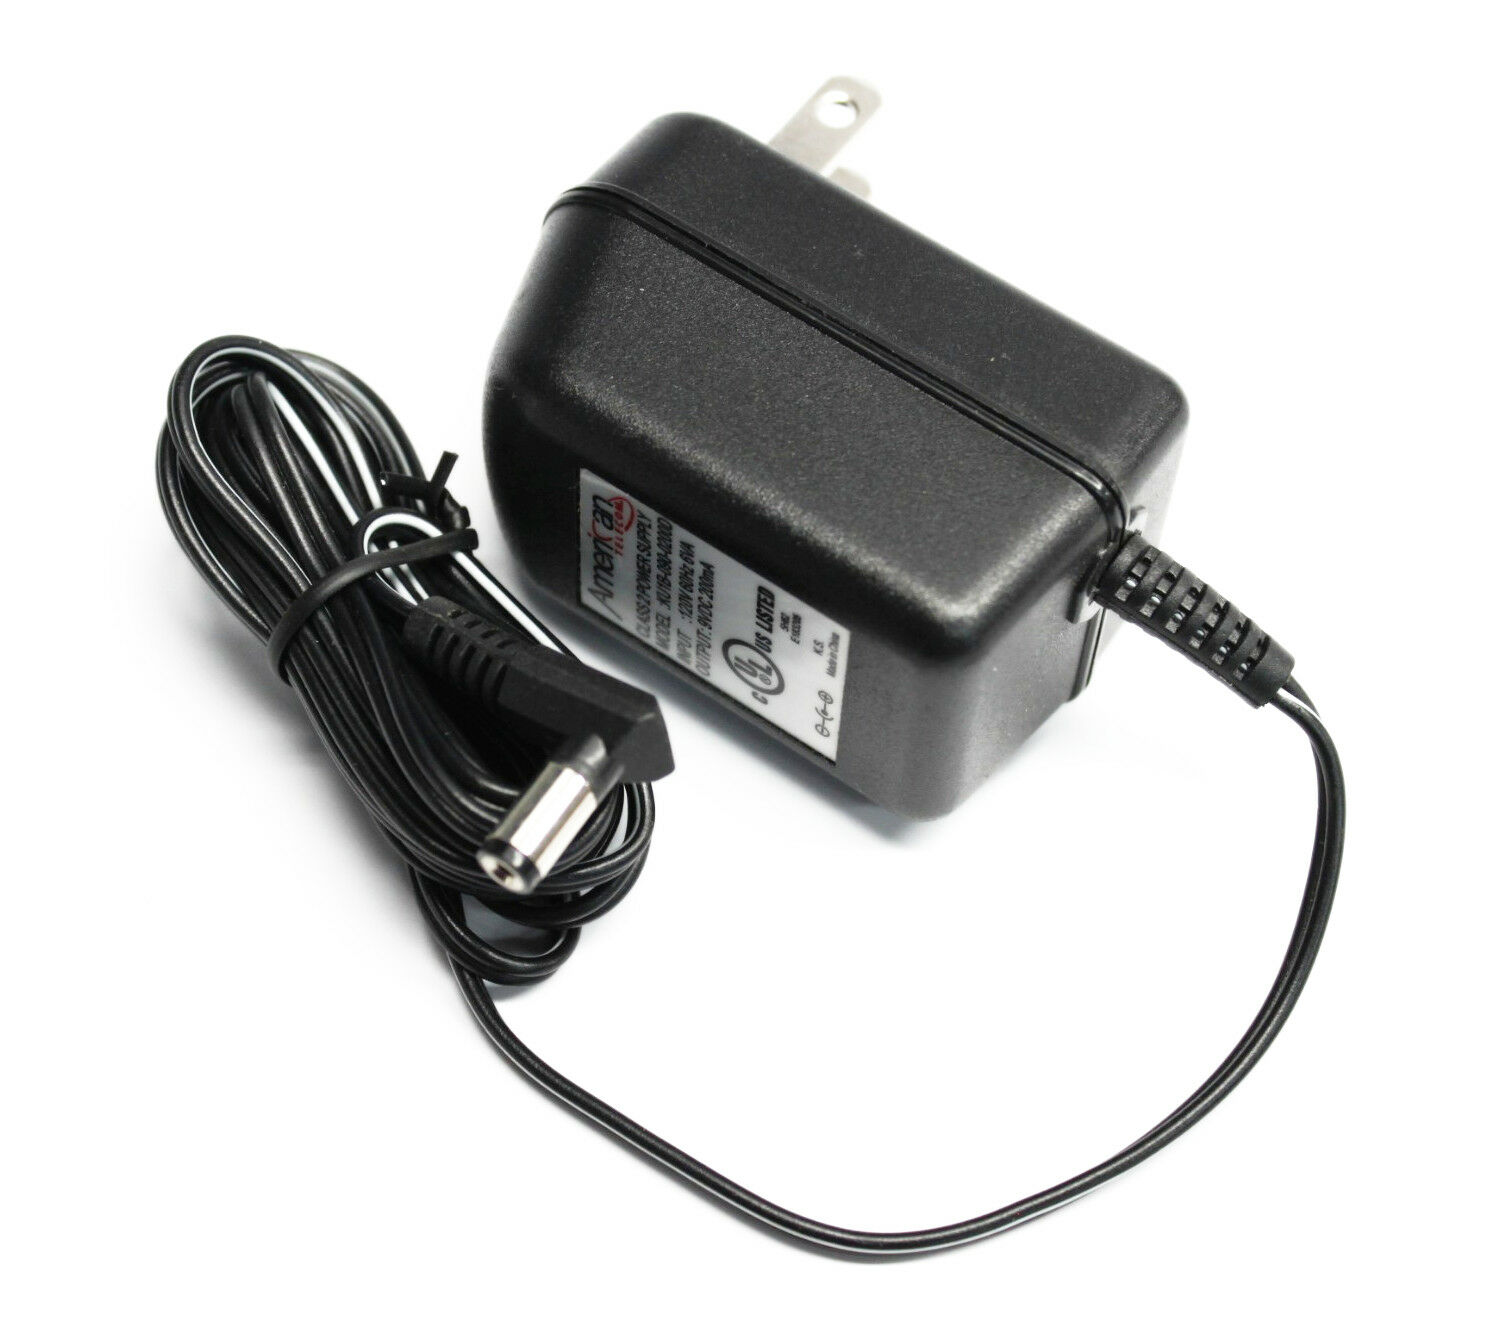 *Brand NEW*for BLUZEN PERCUSSION MASSAGER HP-669 7.4V power supply charger AC Adapter